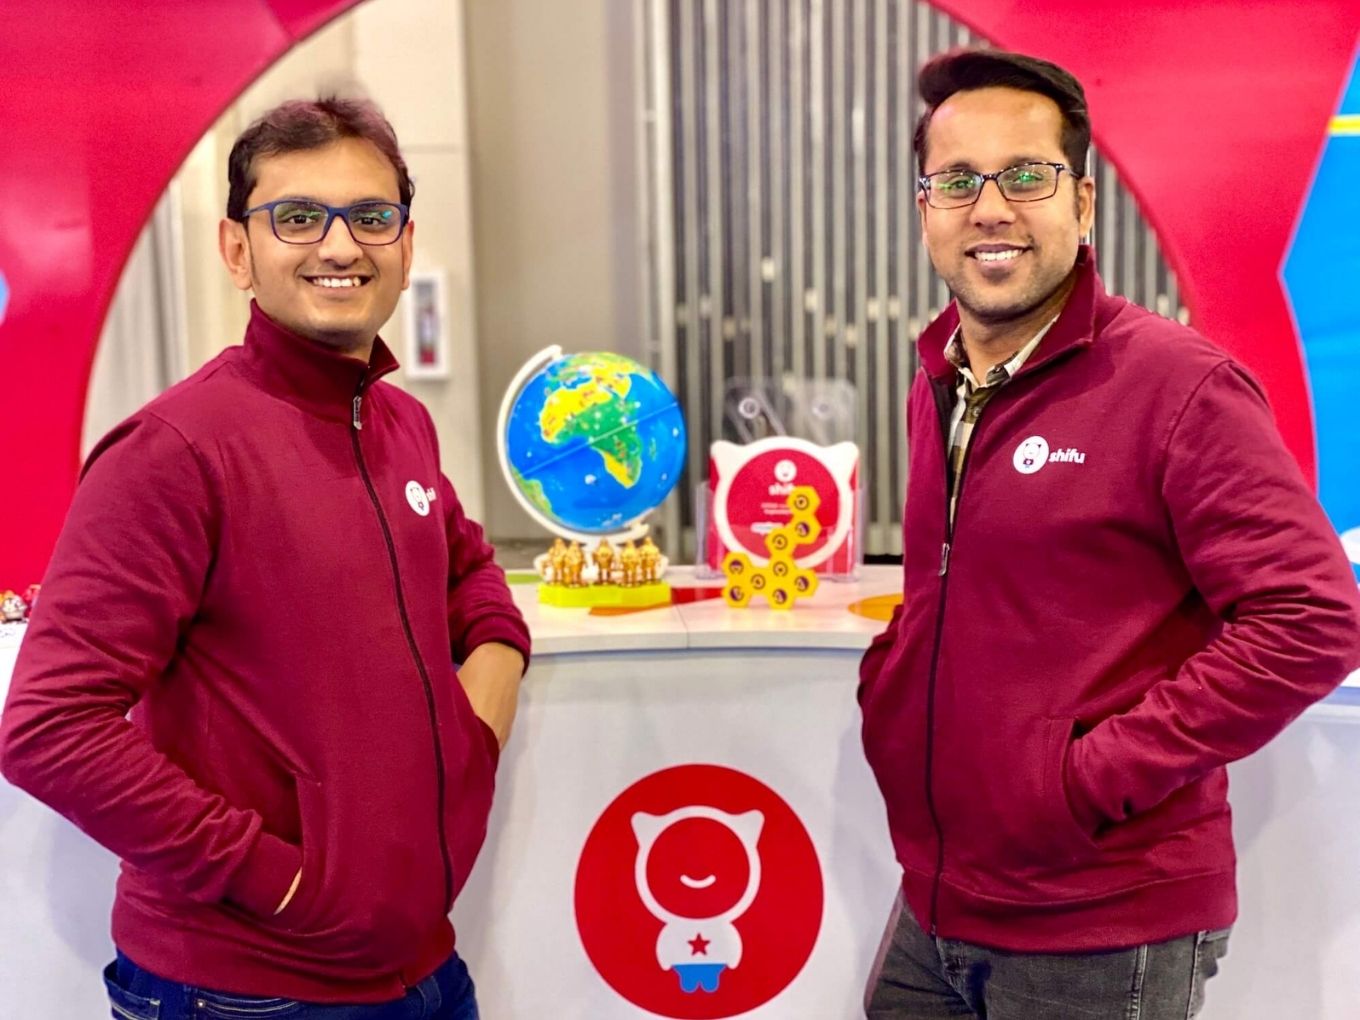 40 Countries, 30 Products, 20 Skills: AR Edtech Startup PlayShifu Plans Major Expansion With $17 Mn Series B